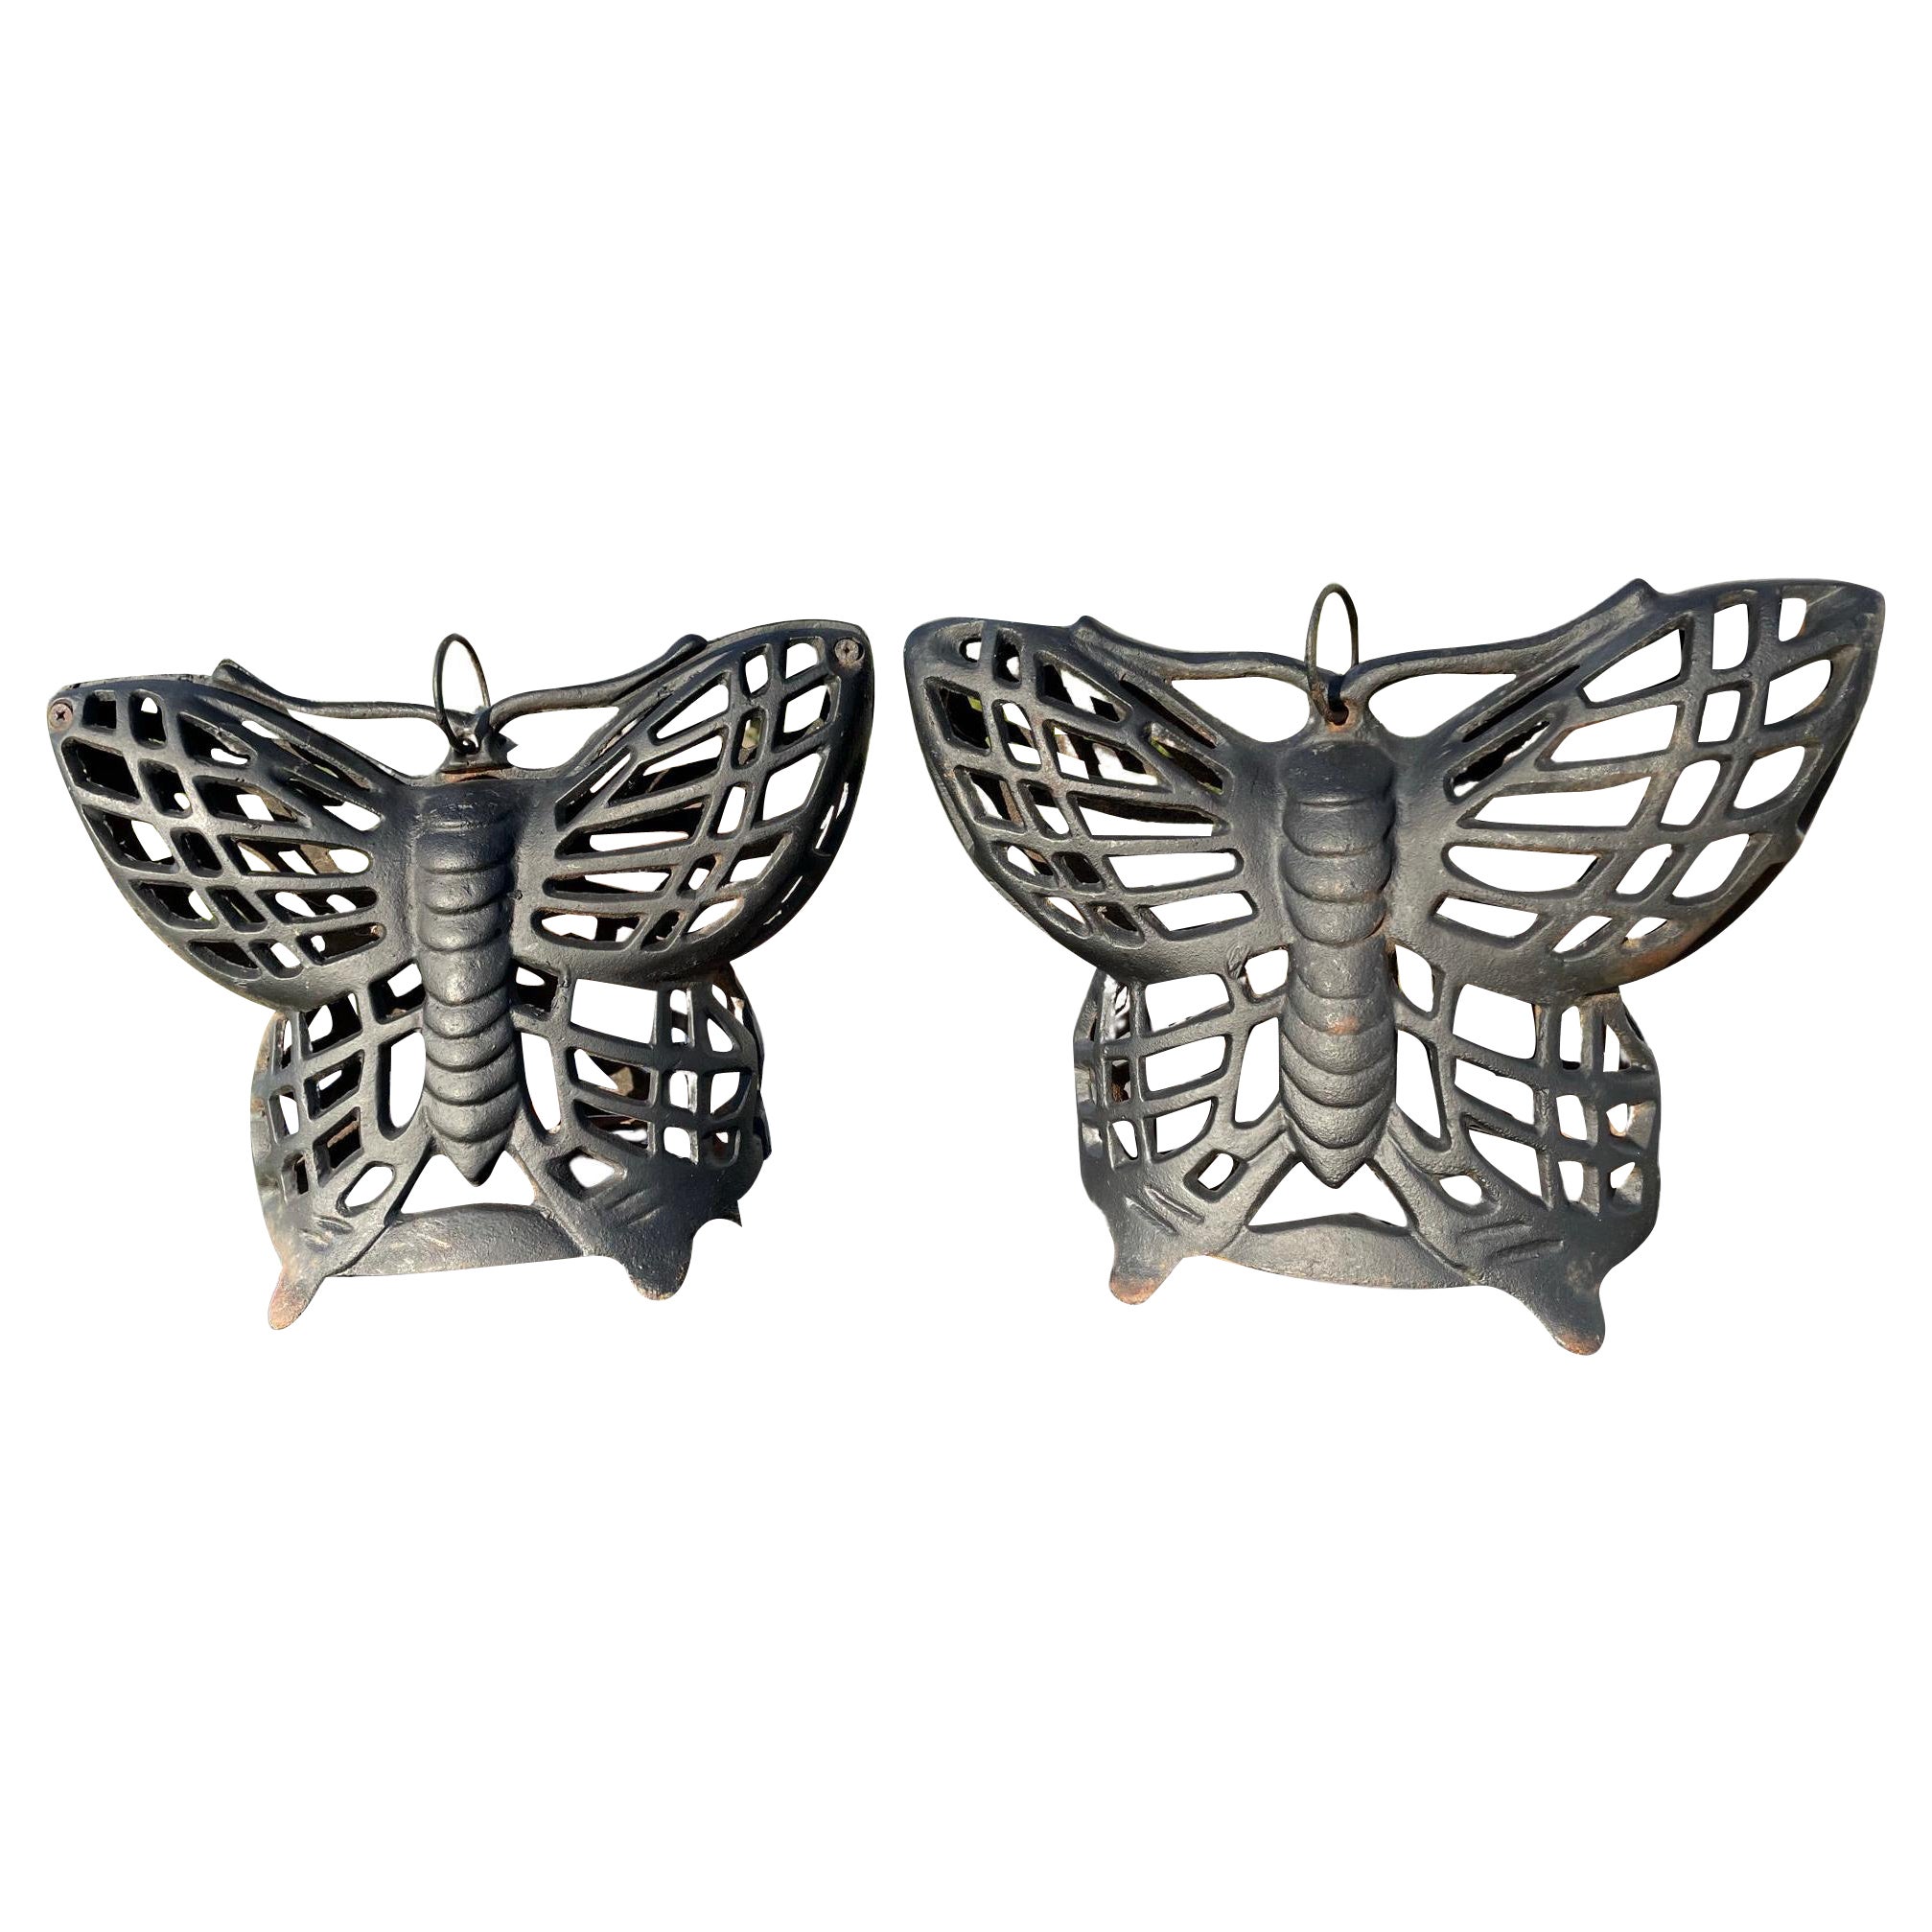 Japanese Old Heavy Cast Pair Butterfly Wings Lighting Lanterns